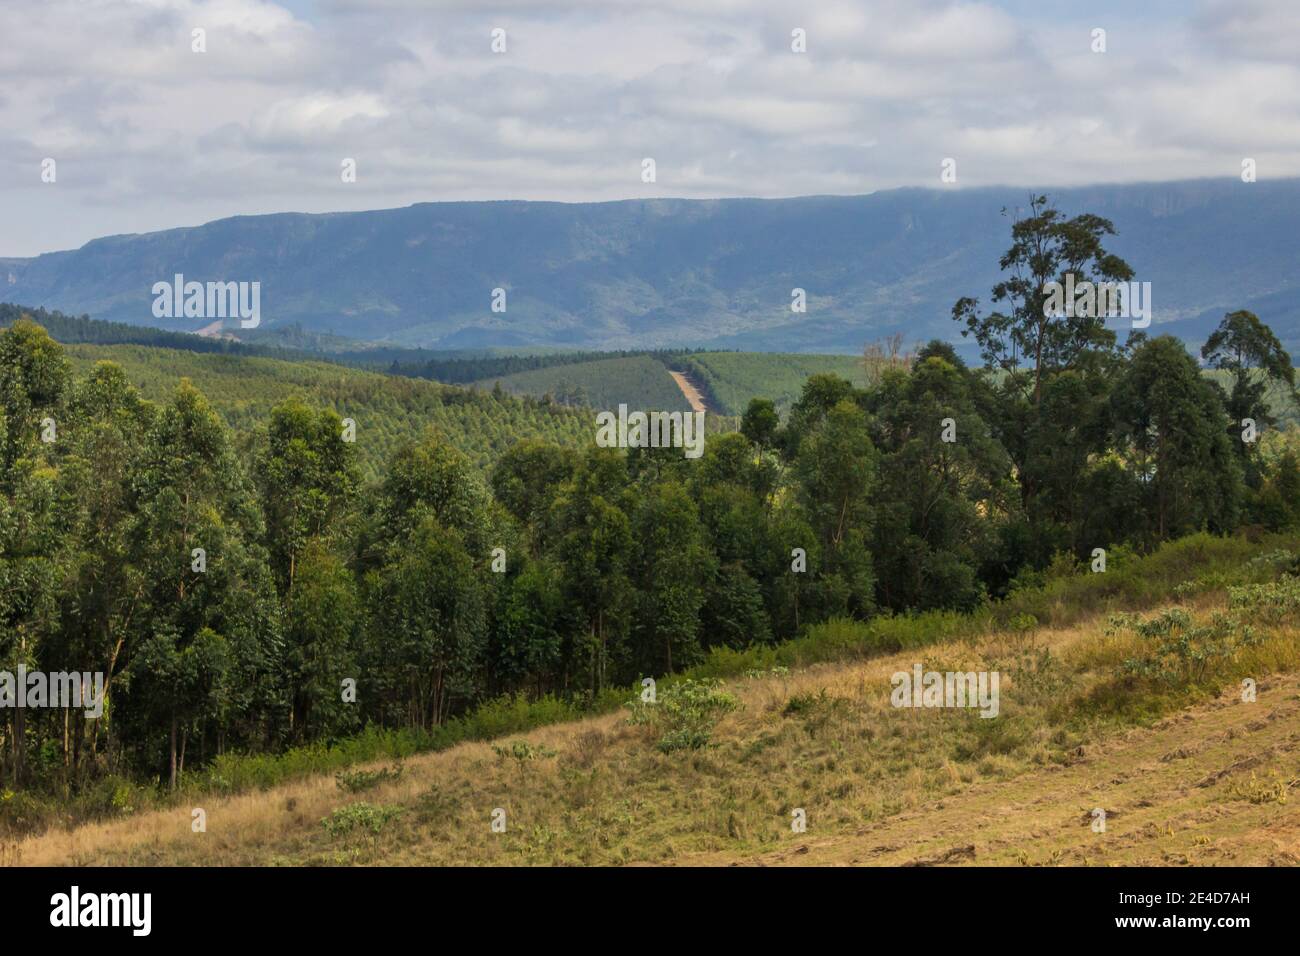 View towards the Mpumalanga escarpment in South Africa, with a eucalyptus plantation in the foreground Stock Photo